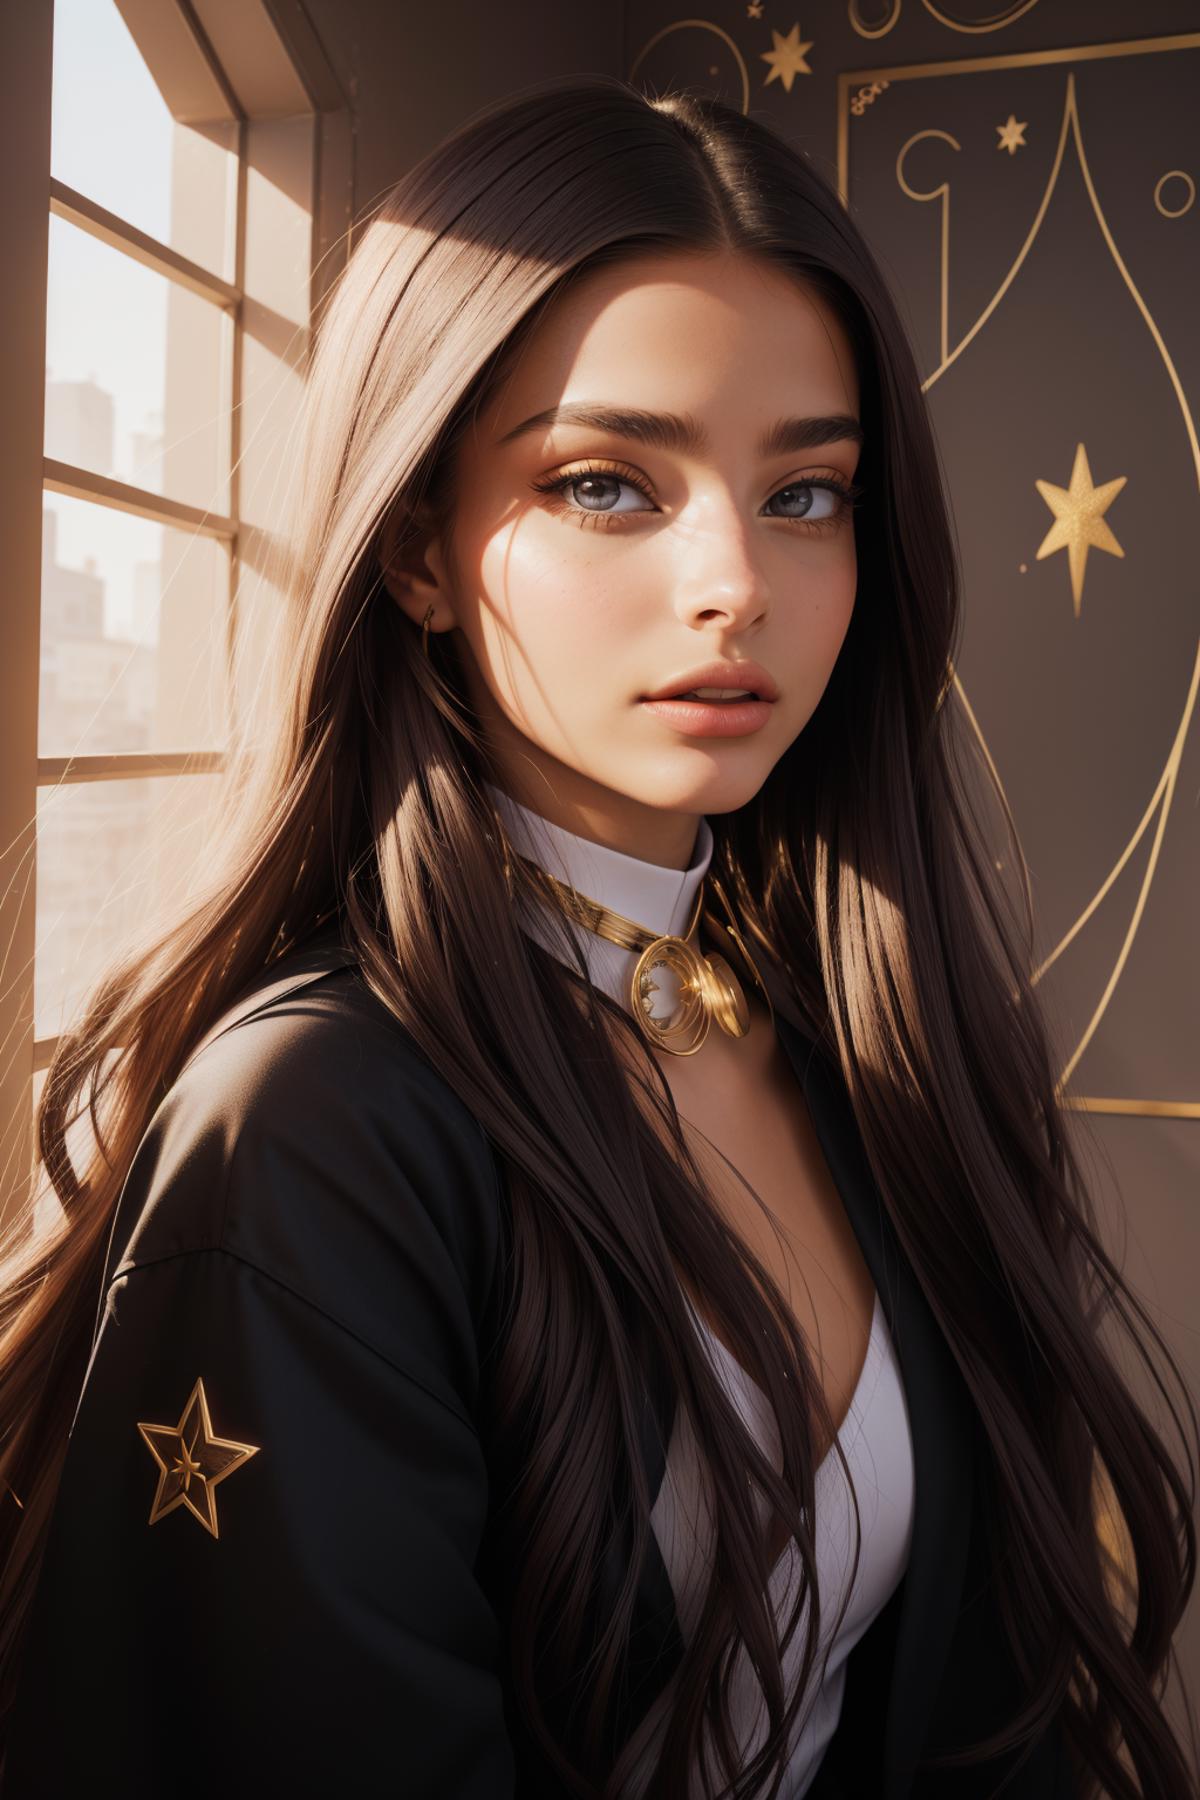 Influencers Deluxe - Keira Munroe image by evtqtyn912